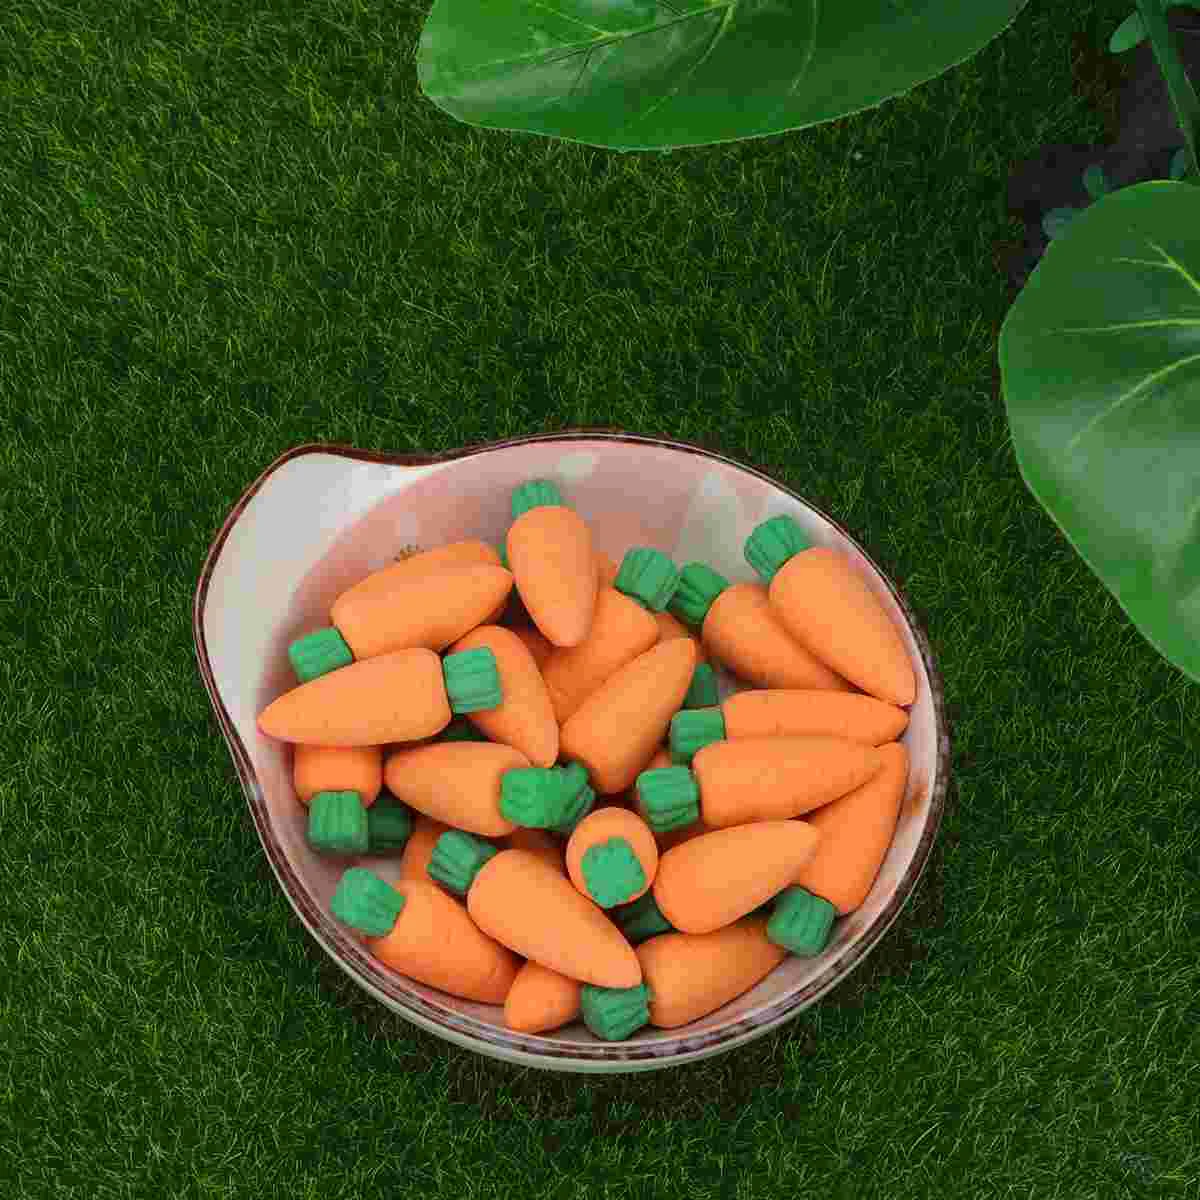 

Eraser Carrot Shaped Eraser Vegetable Shaped Puzzle Erasers School Students Stationery Writing Accessories Office Supplies Kids